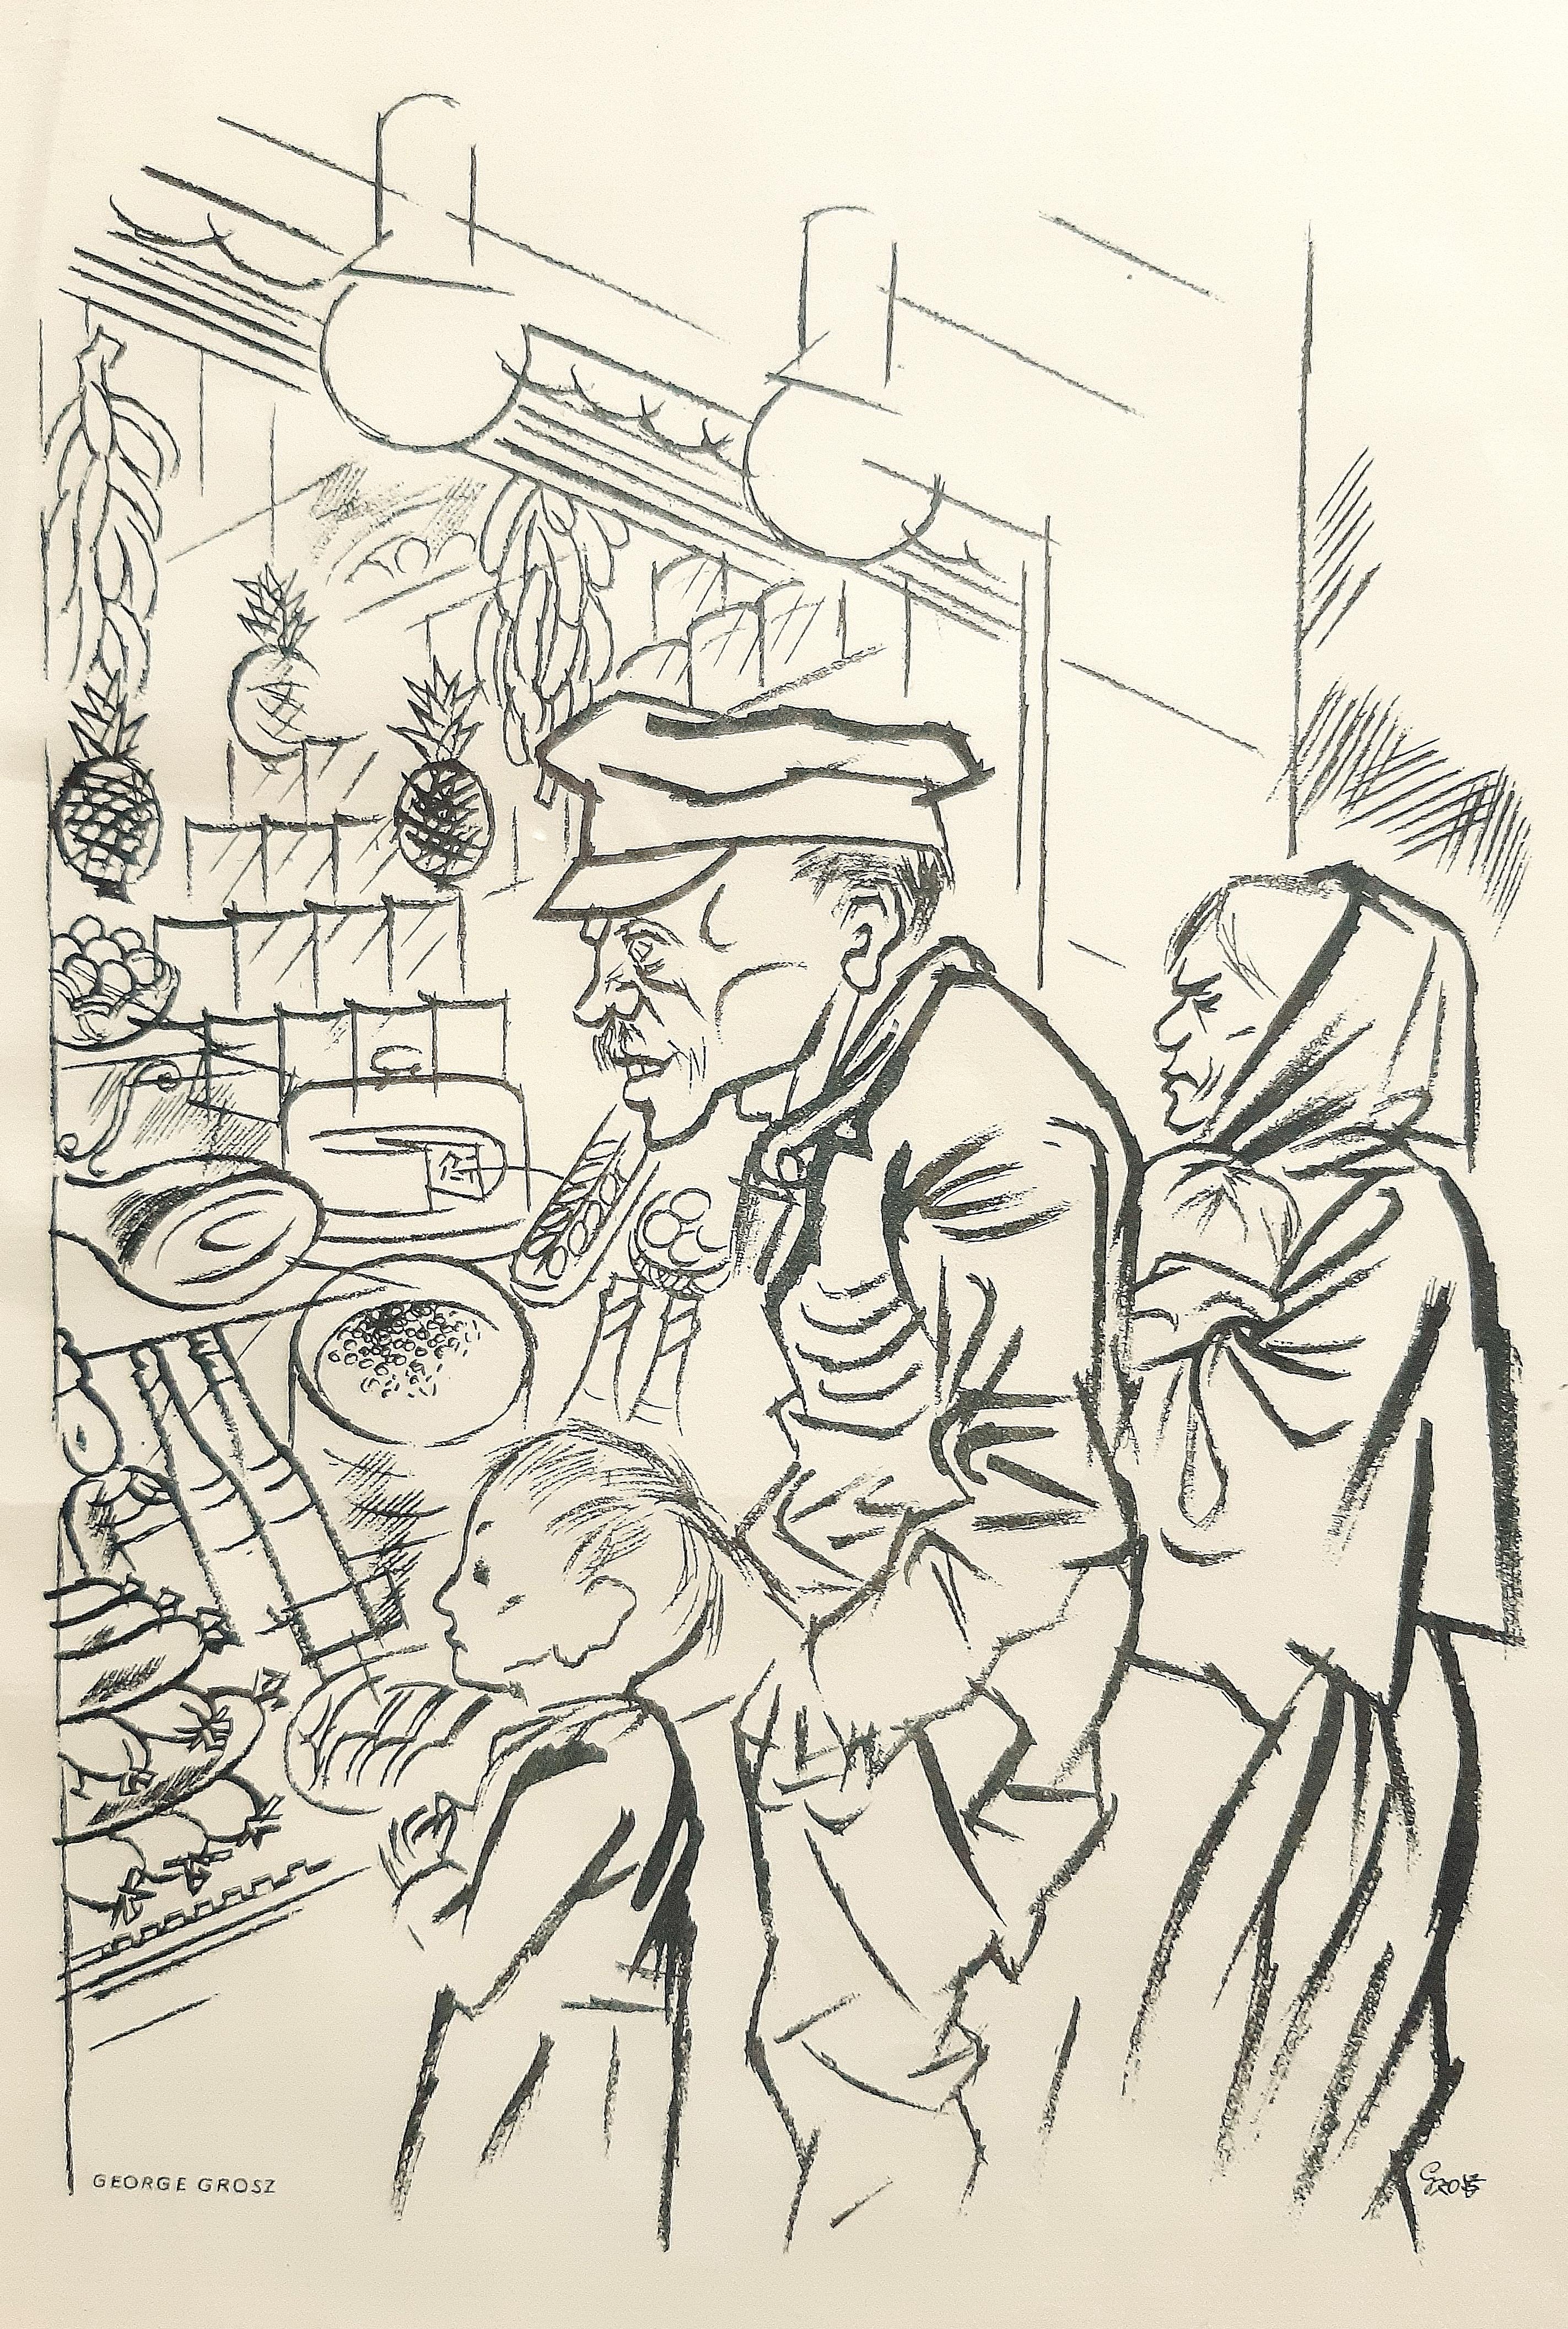 Hunger - Original Lithograph by George Grosz - 1924